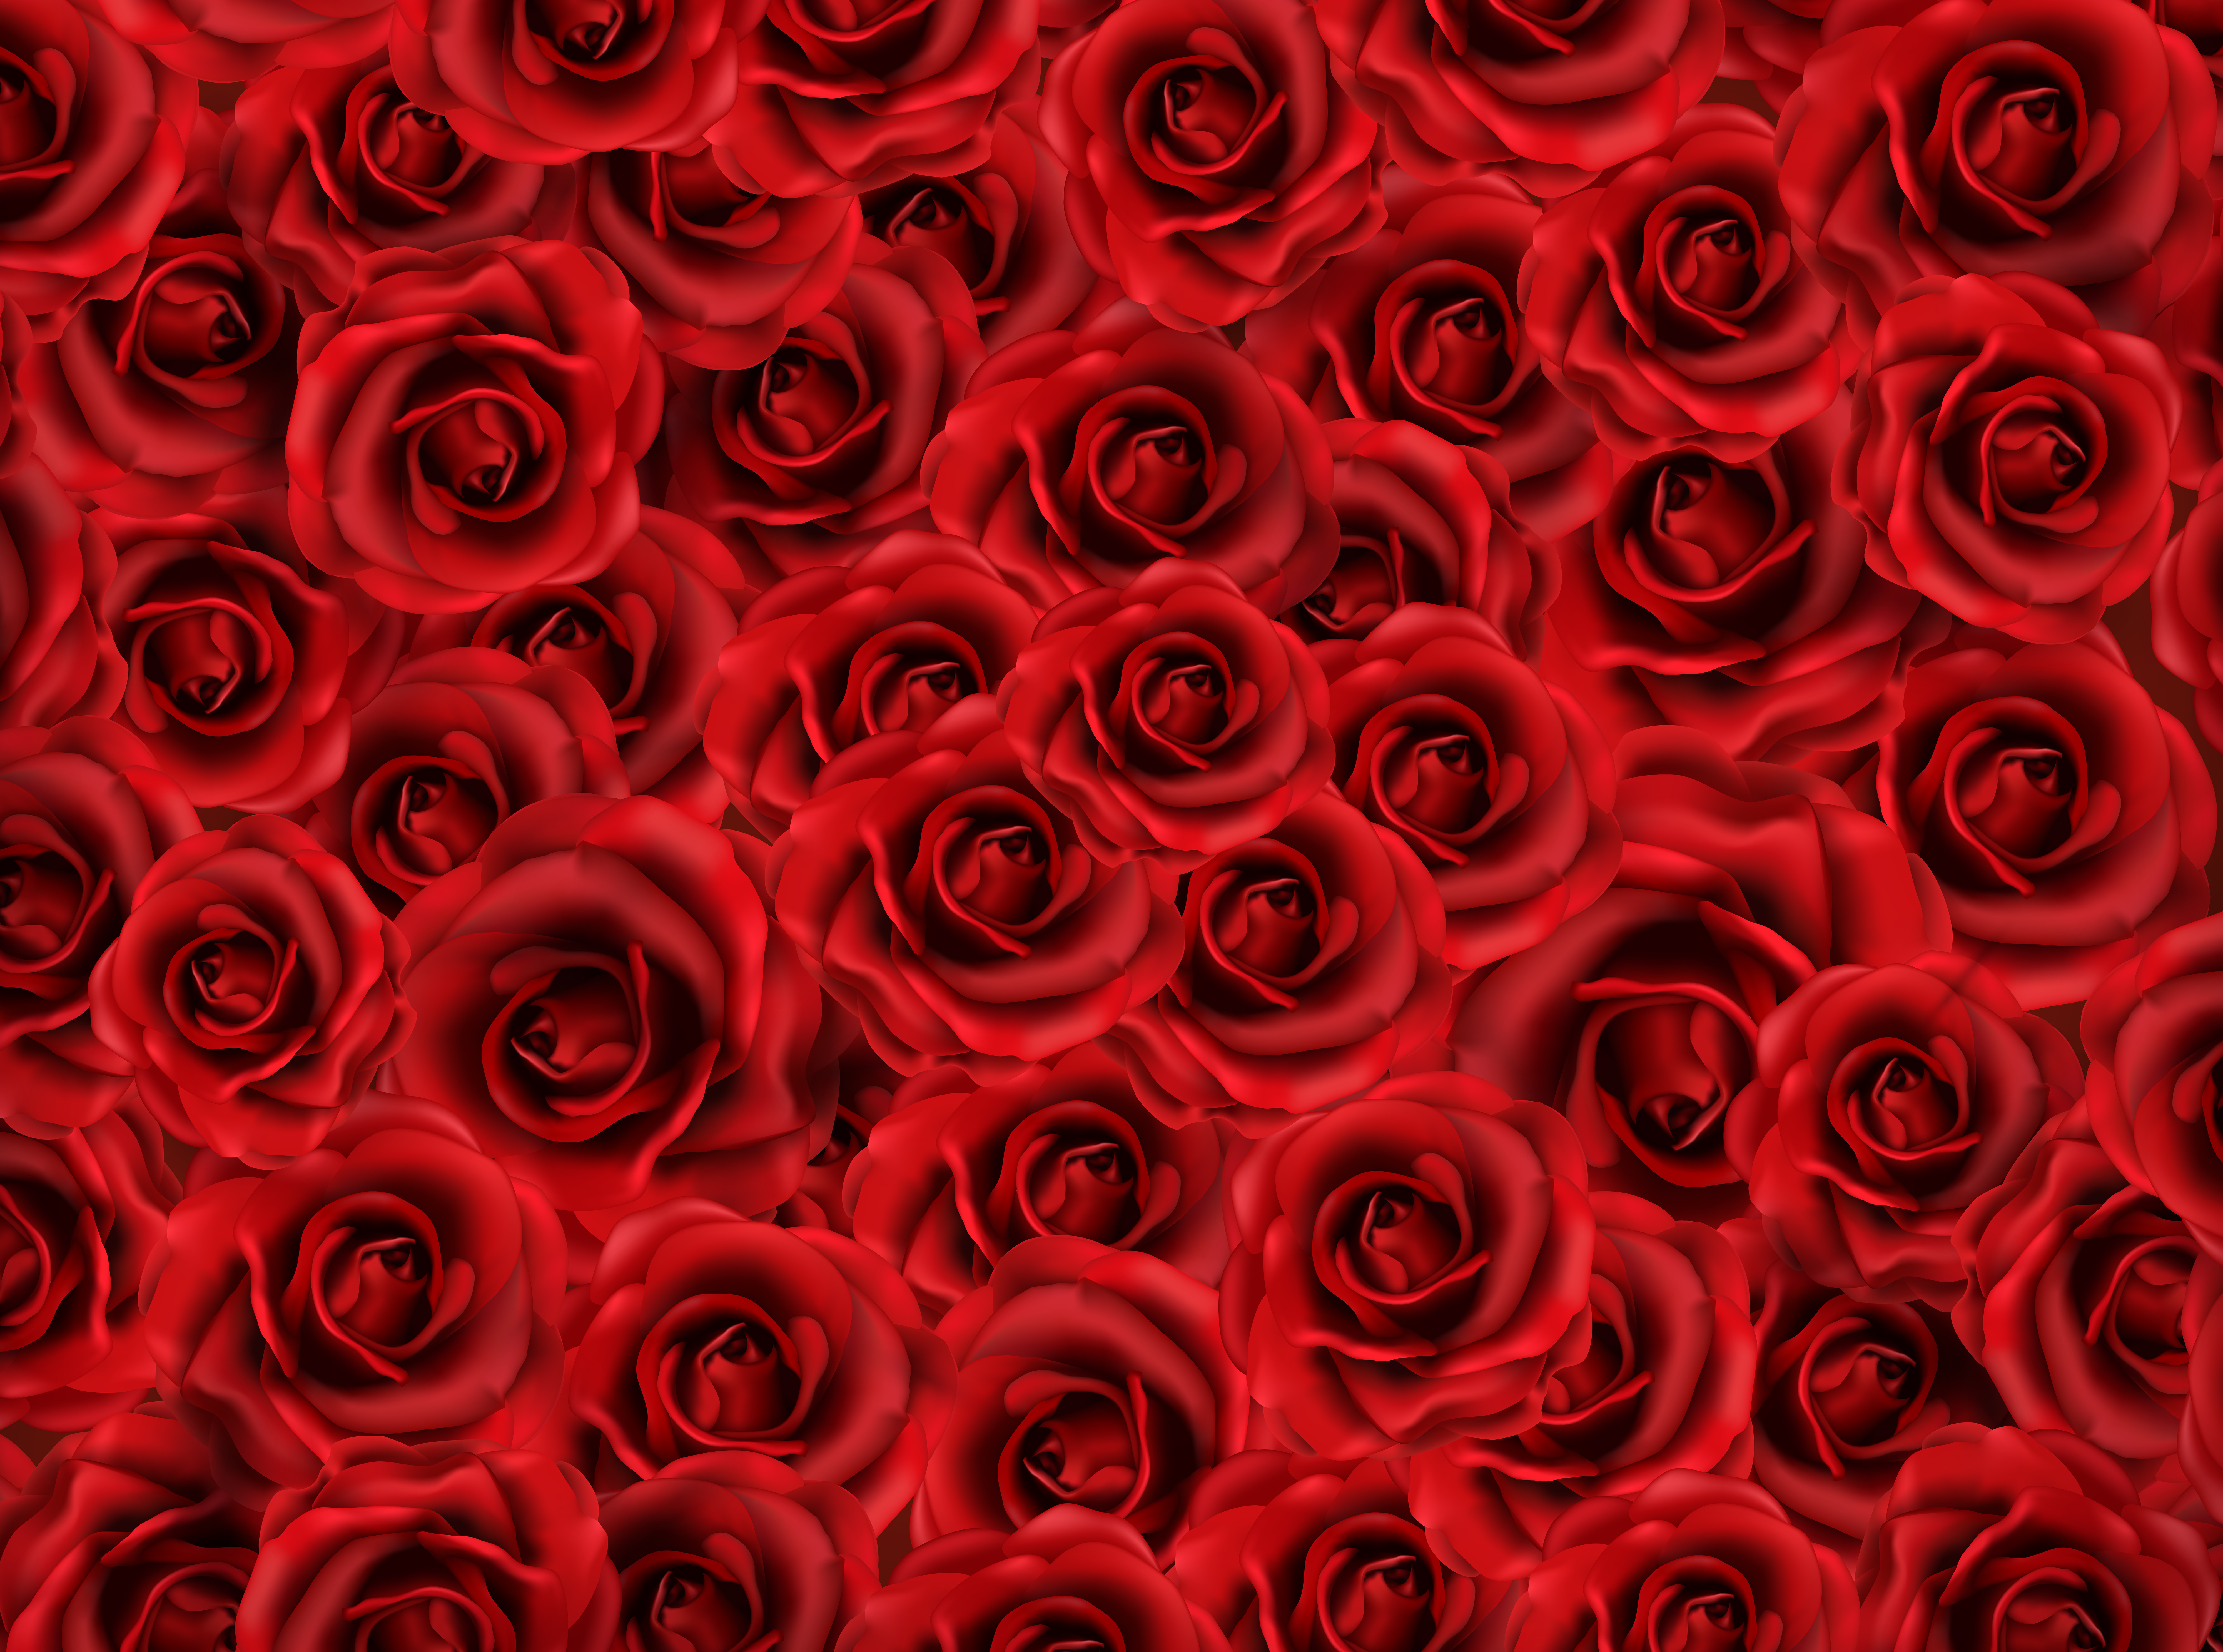 Red Roses Background Gallery Yopriceville   High Quality Images